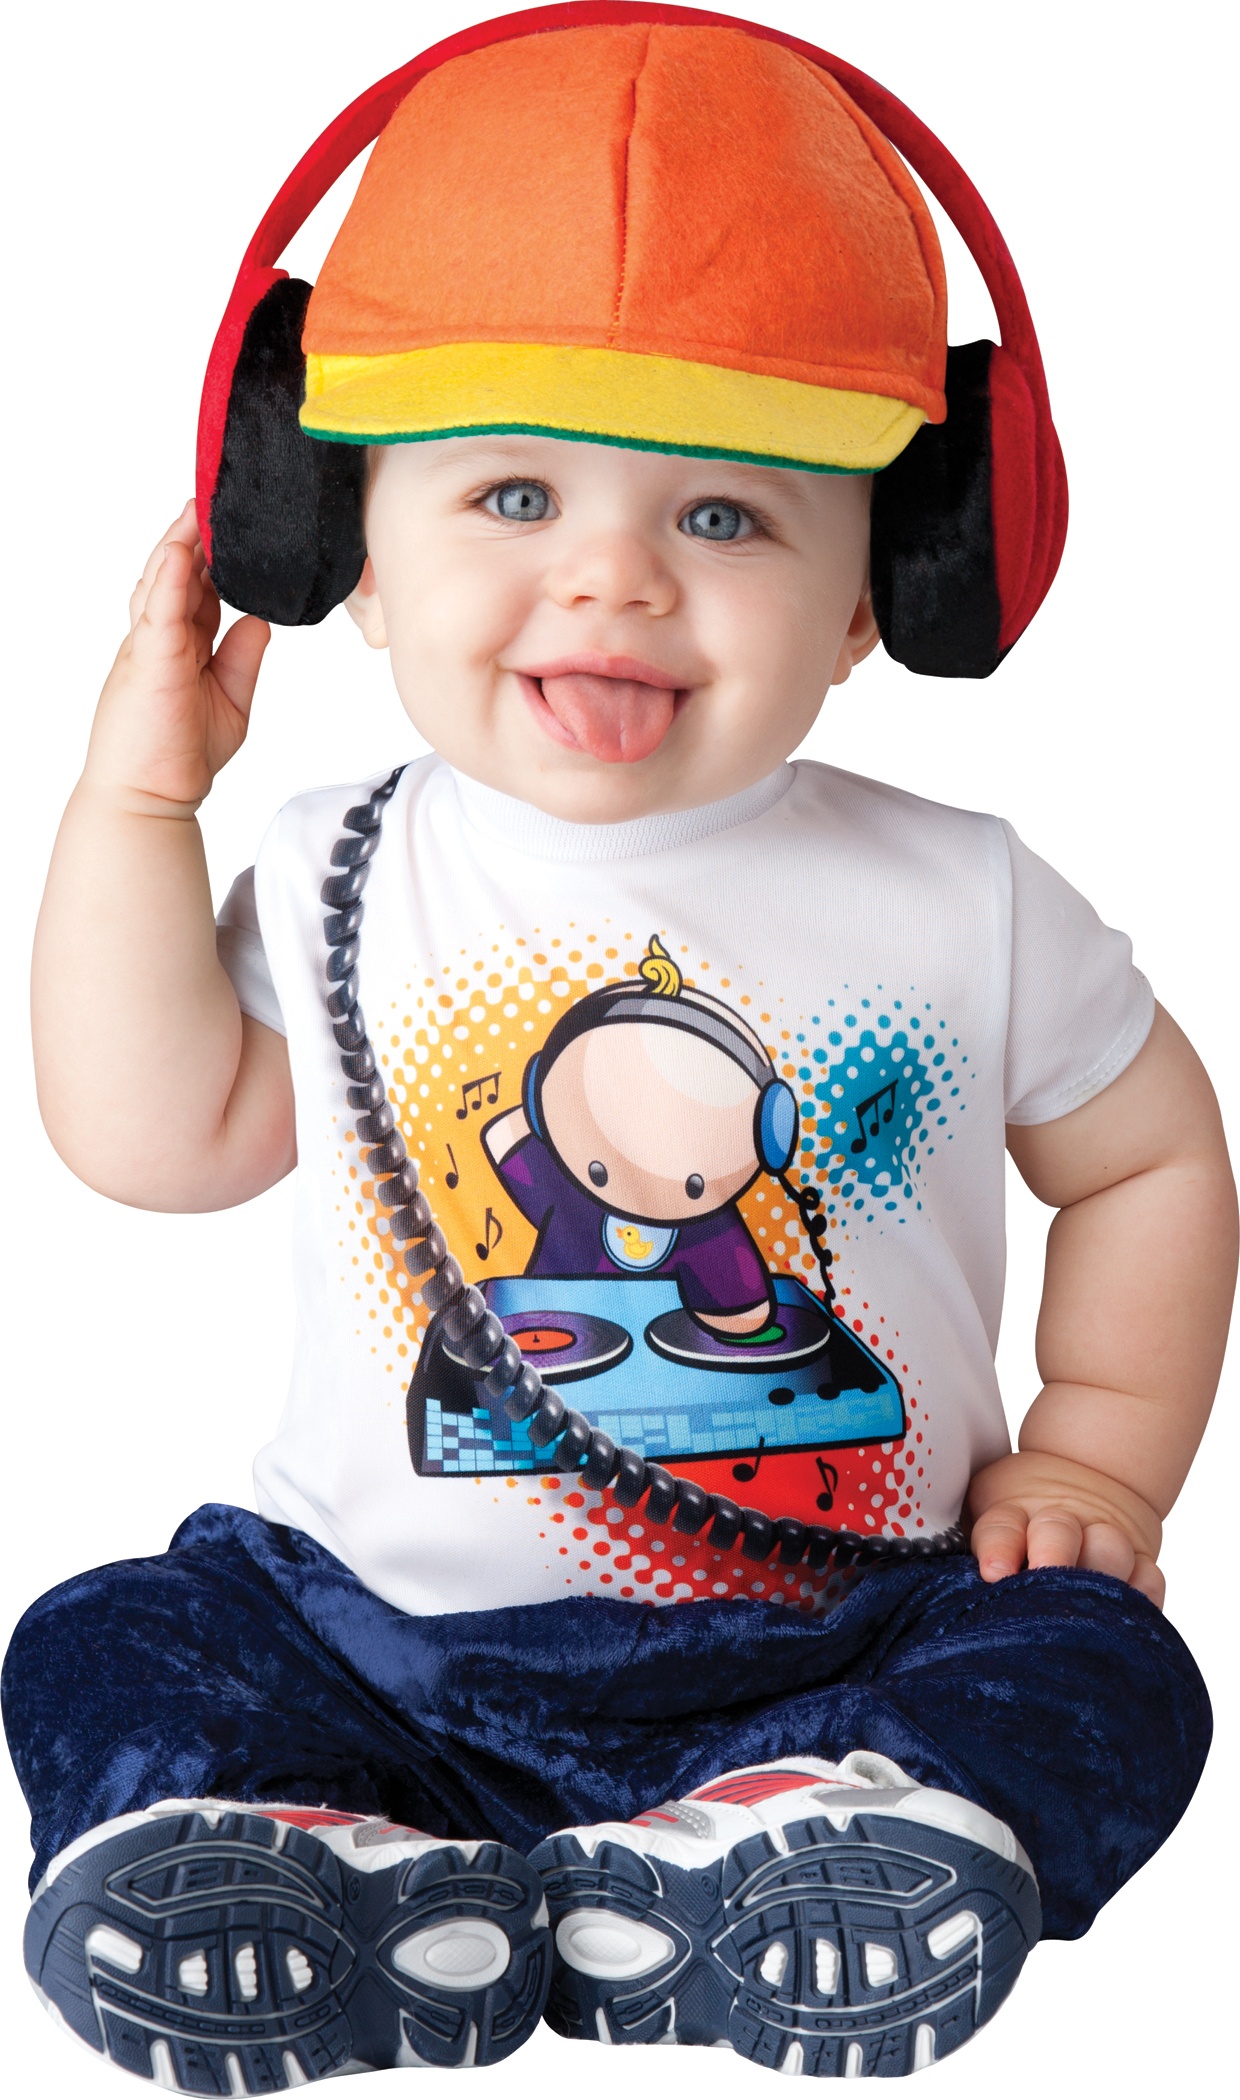 ... New Costumes >> New Costumes for Babies >> Baby Beats DJ Baby Costume